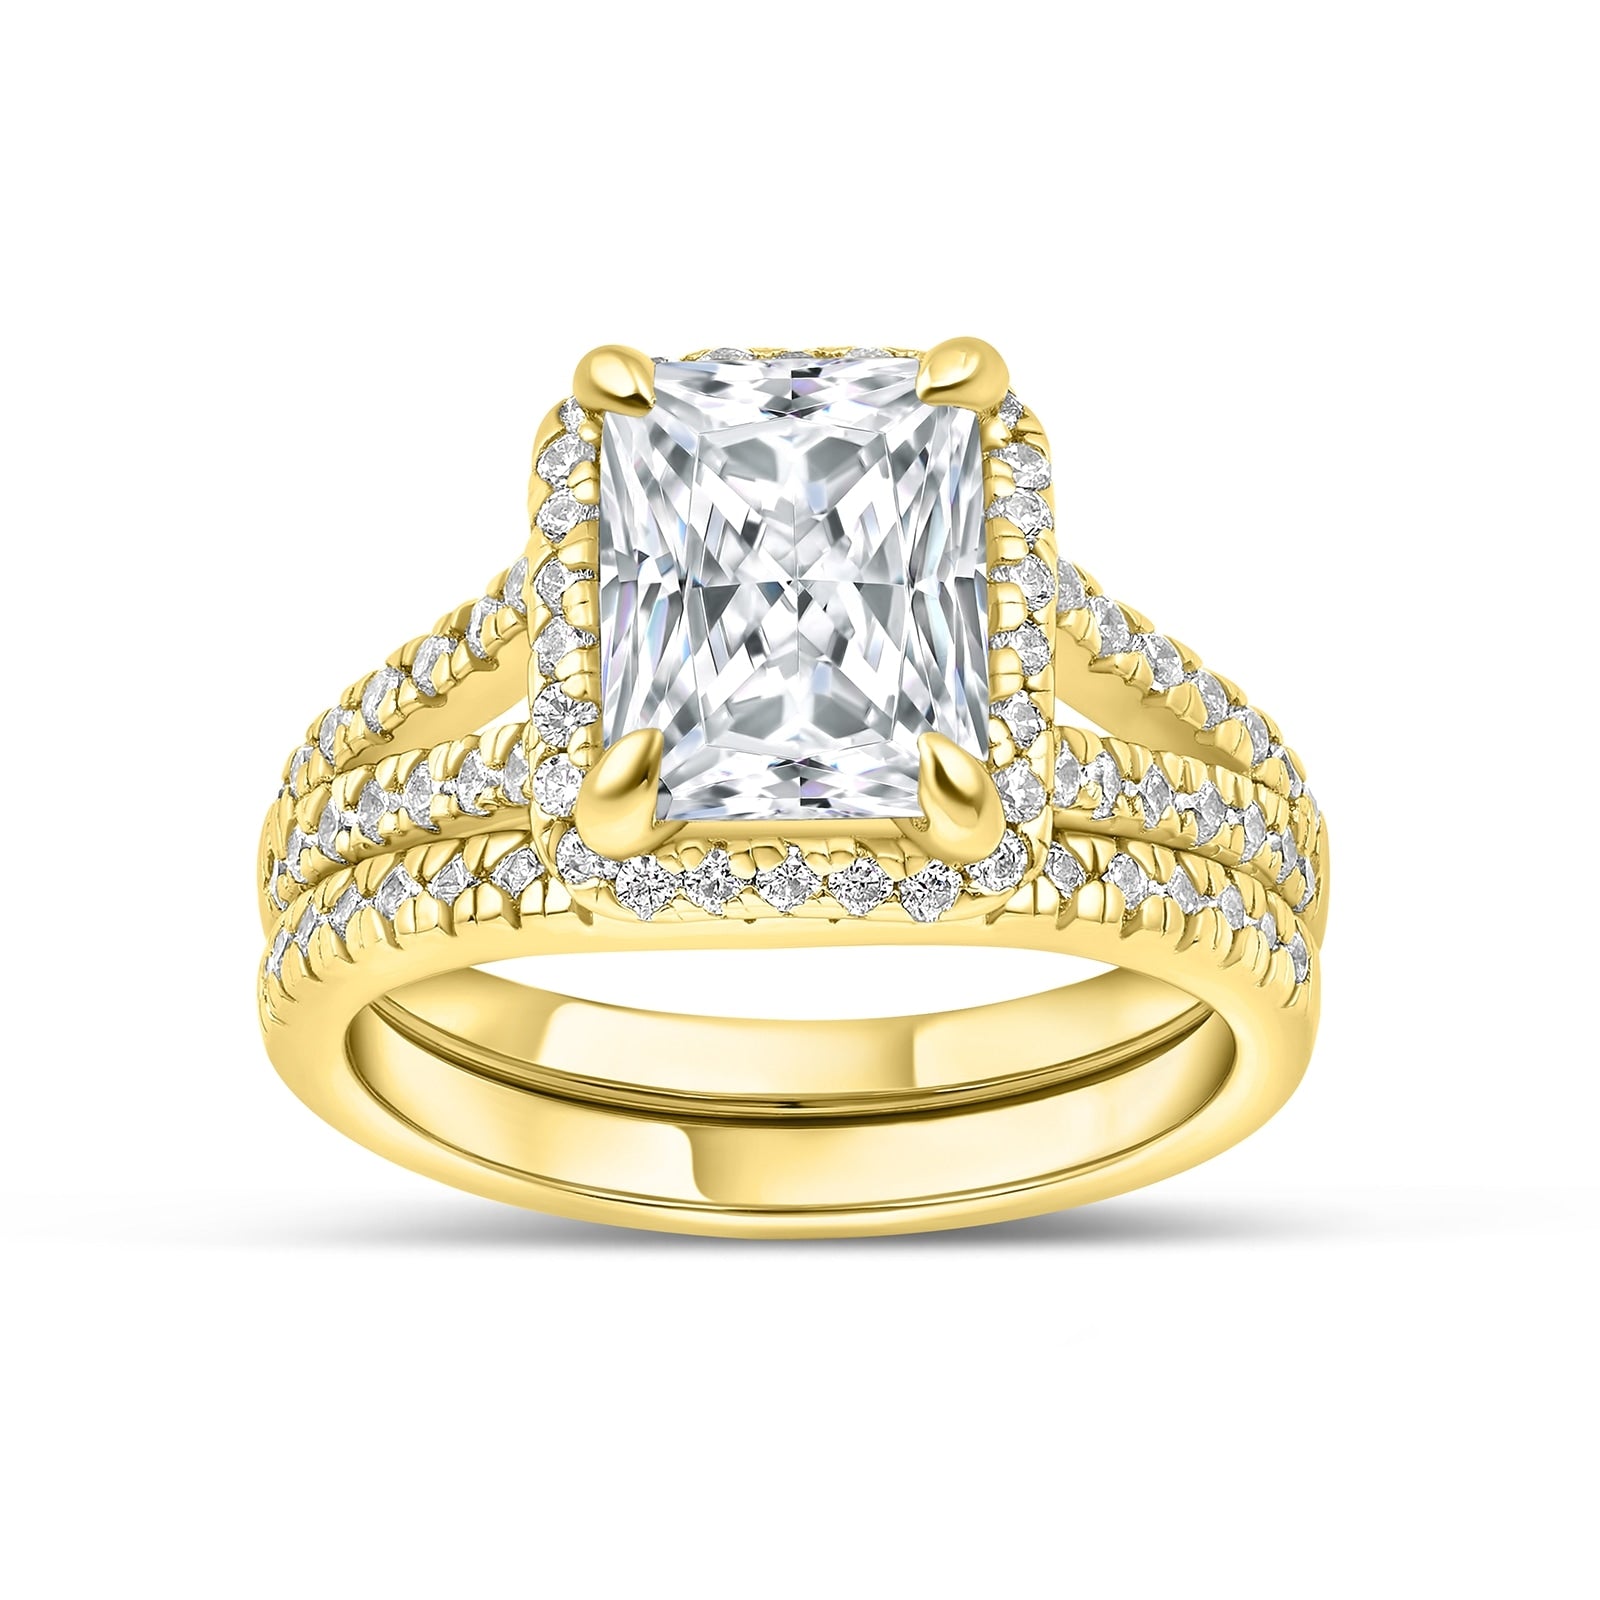 stunning gold 3.5 carat radiant cut engagement ring with slightly curved half eternity band that sits flush with it